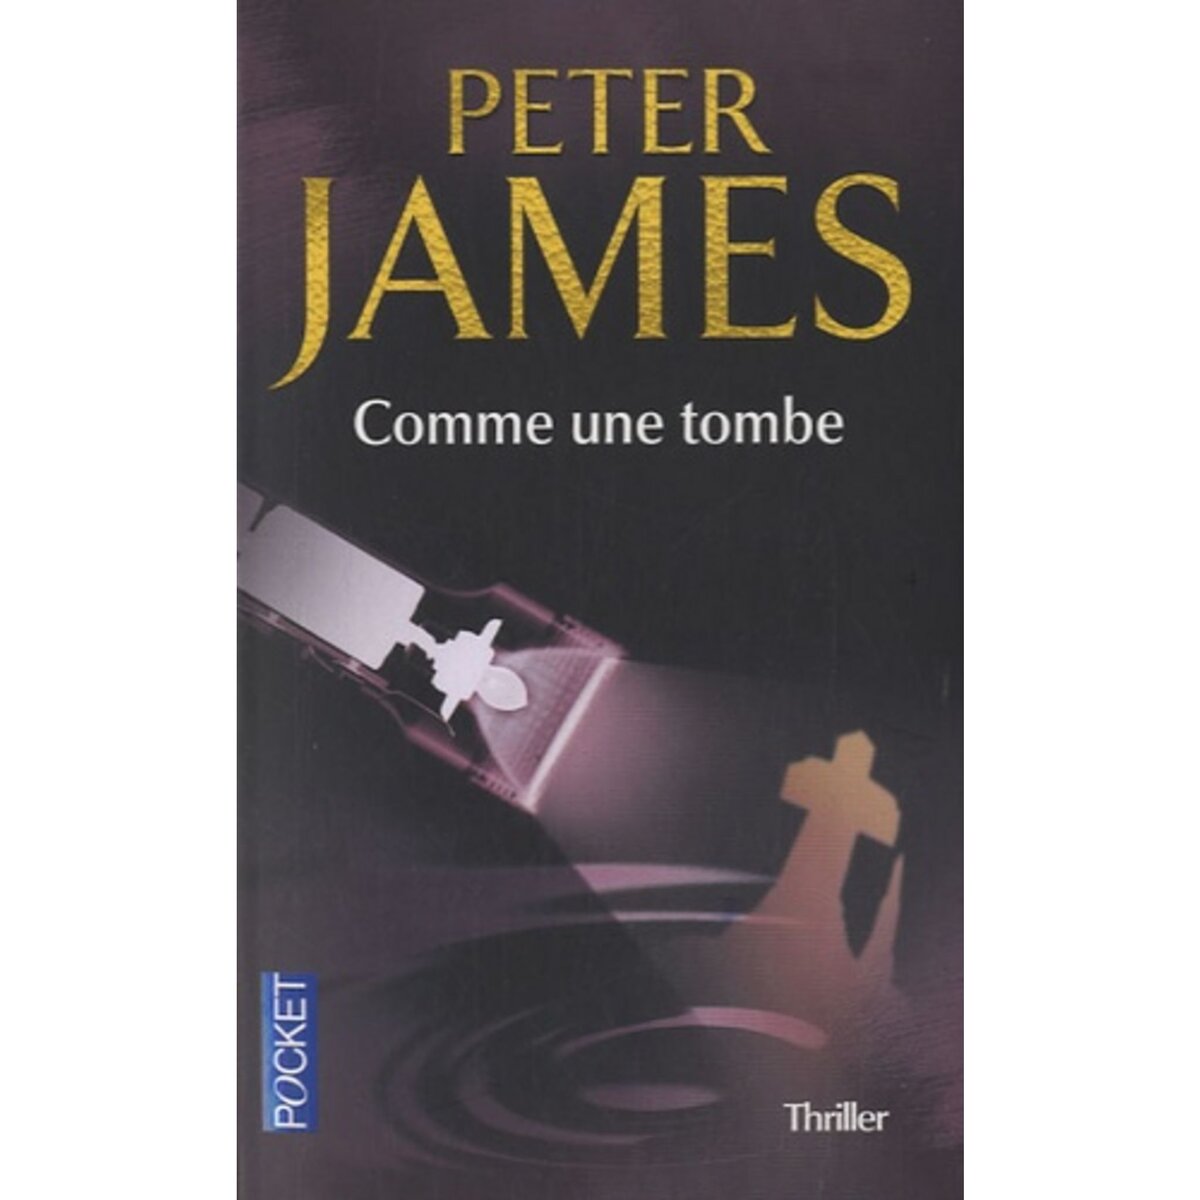  COMME UNE TOMBE, James Peter